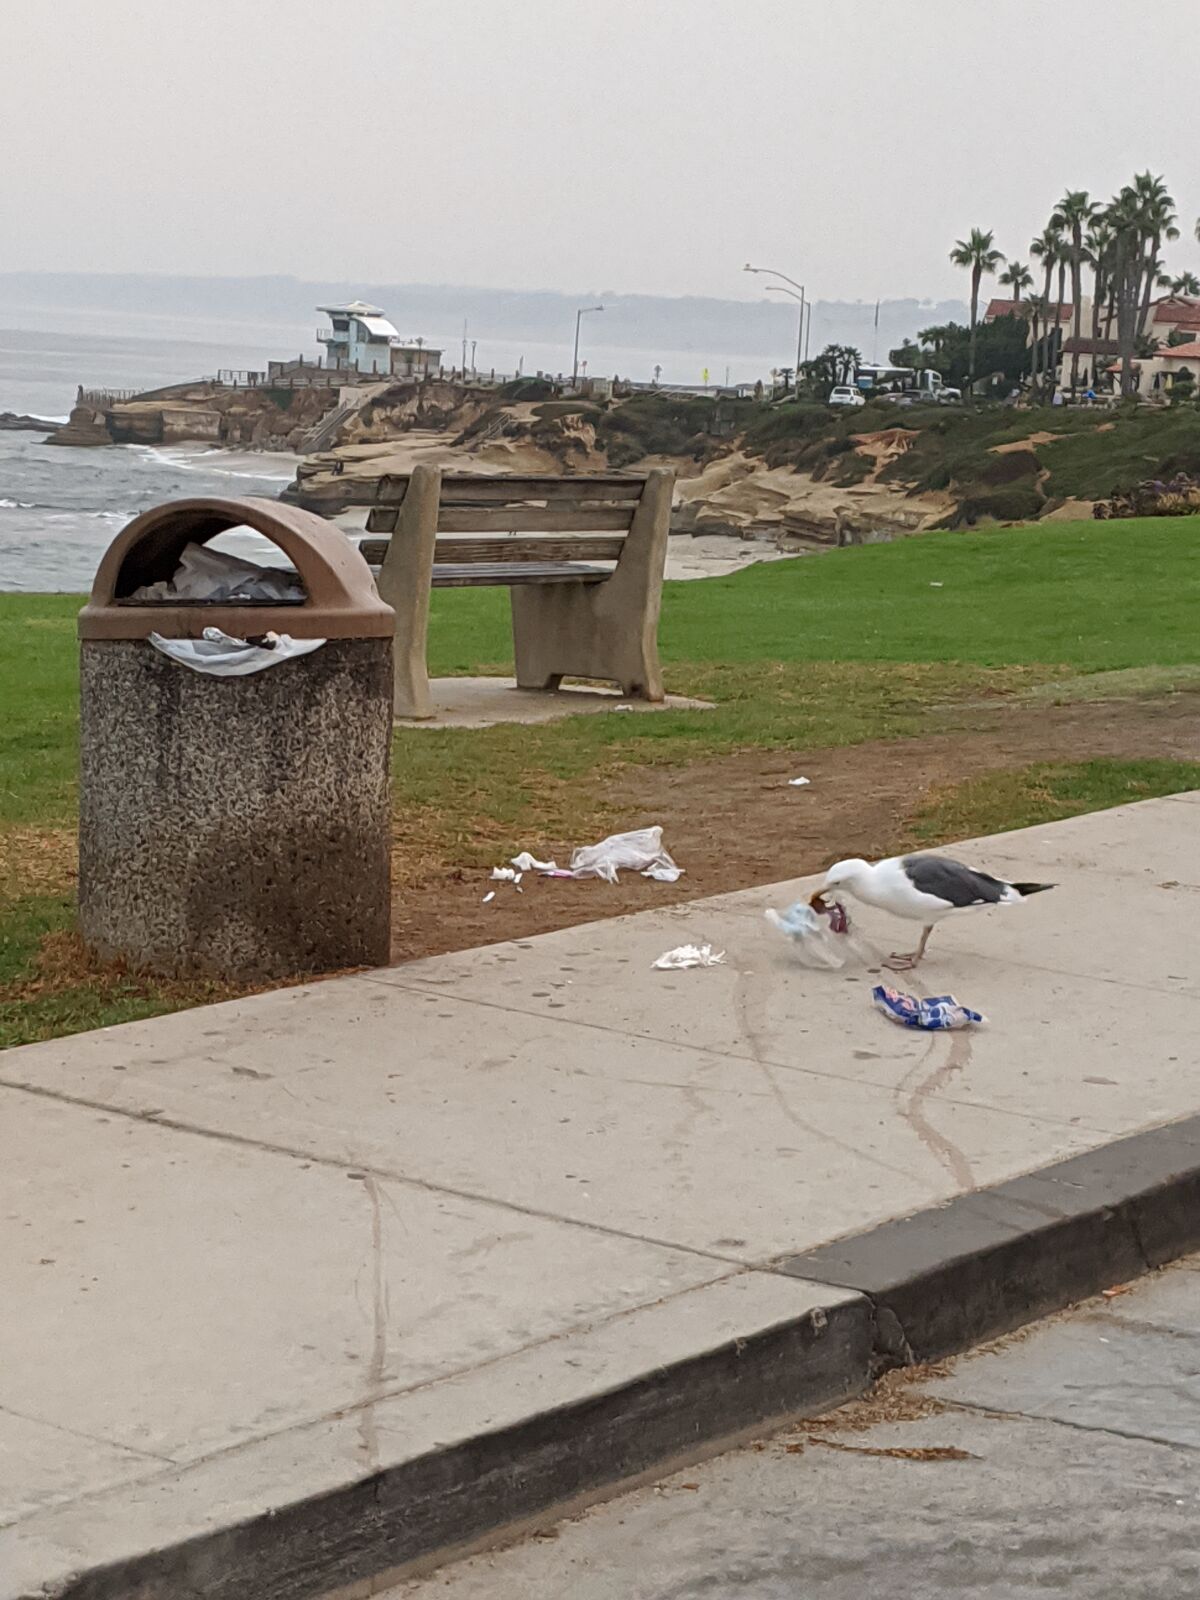 Jan Hageman wants new trash cans in La Jolla to take the place of containers like this one that seagulls can get into.